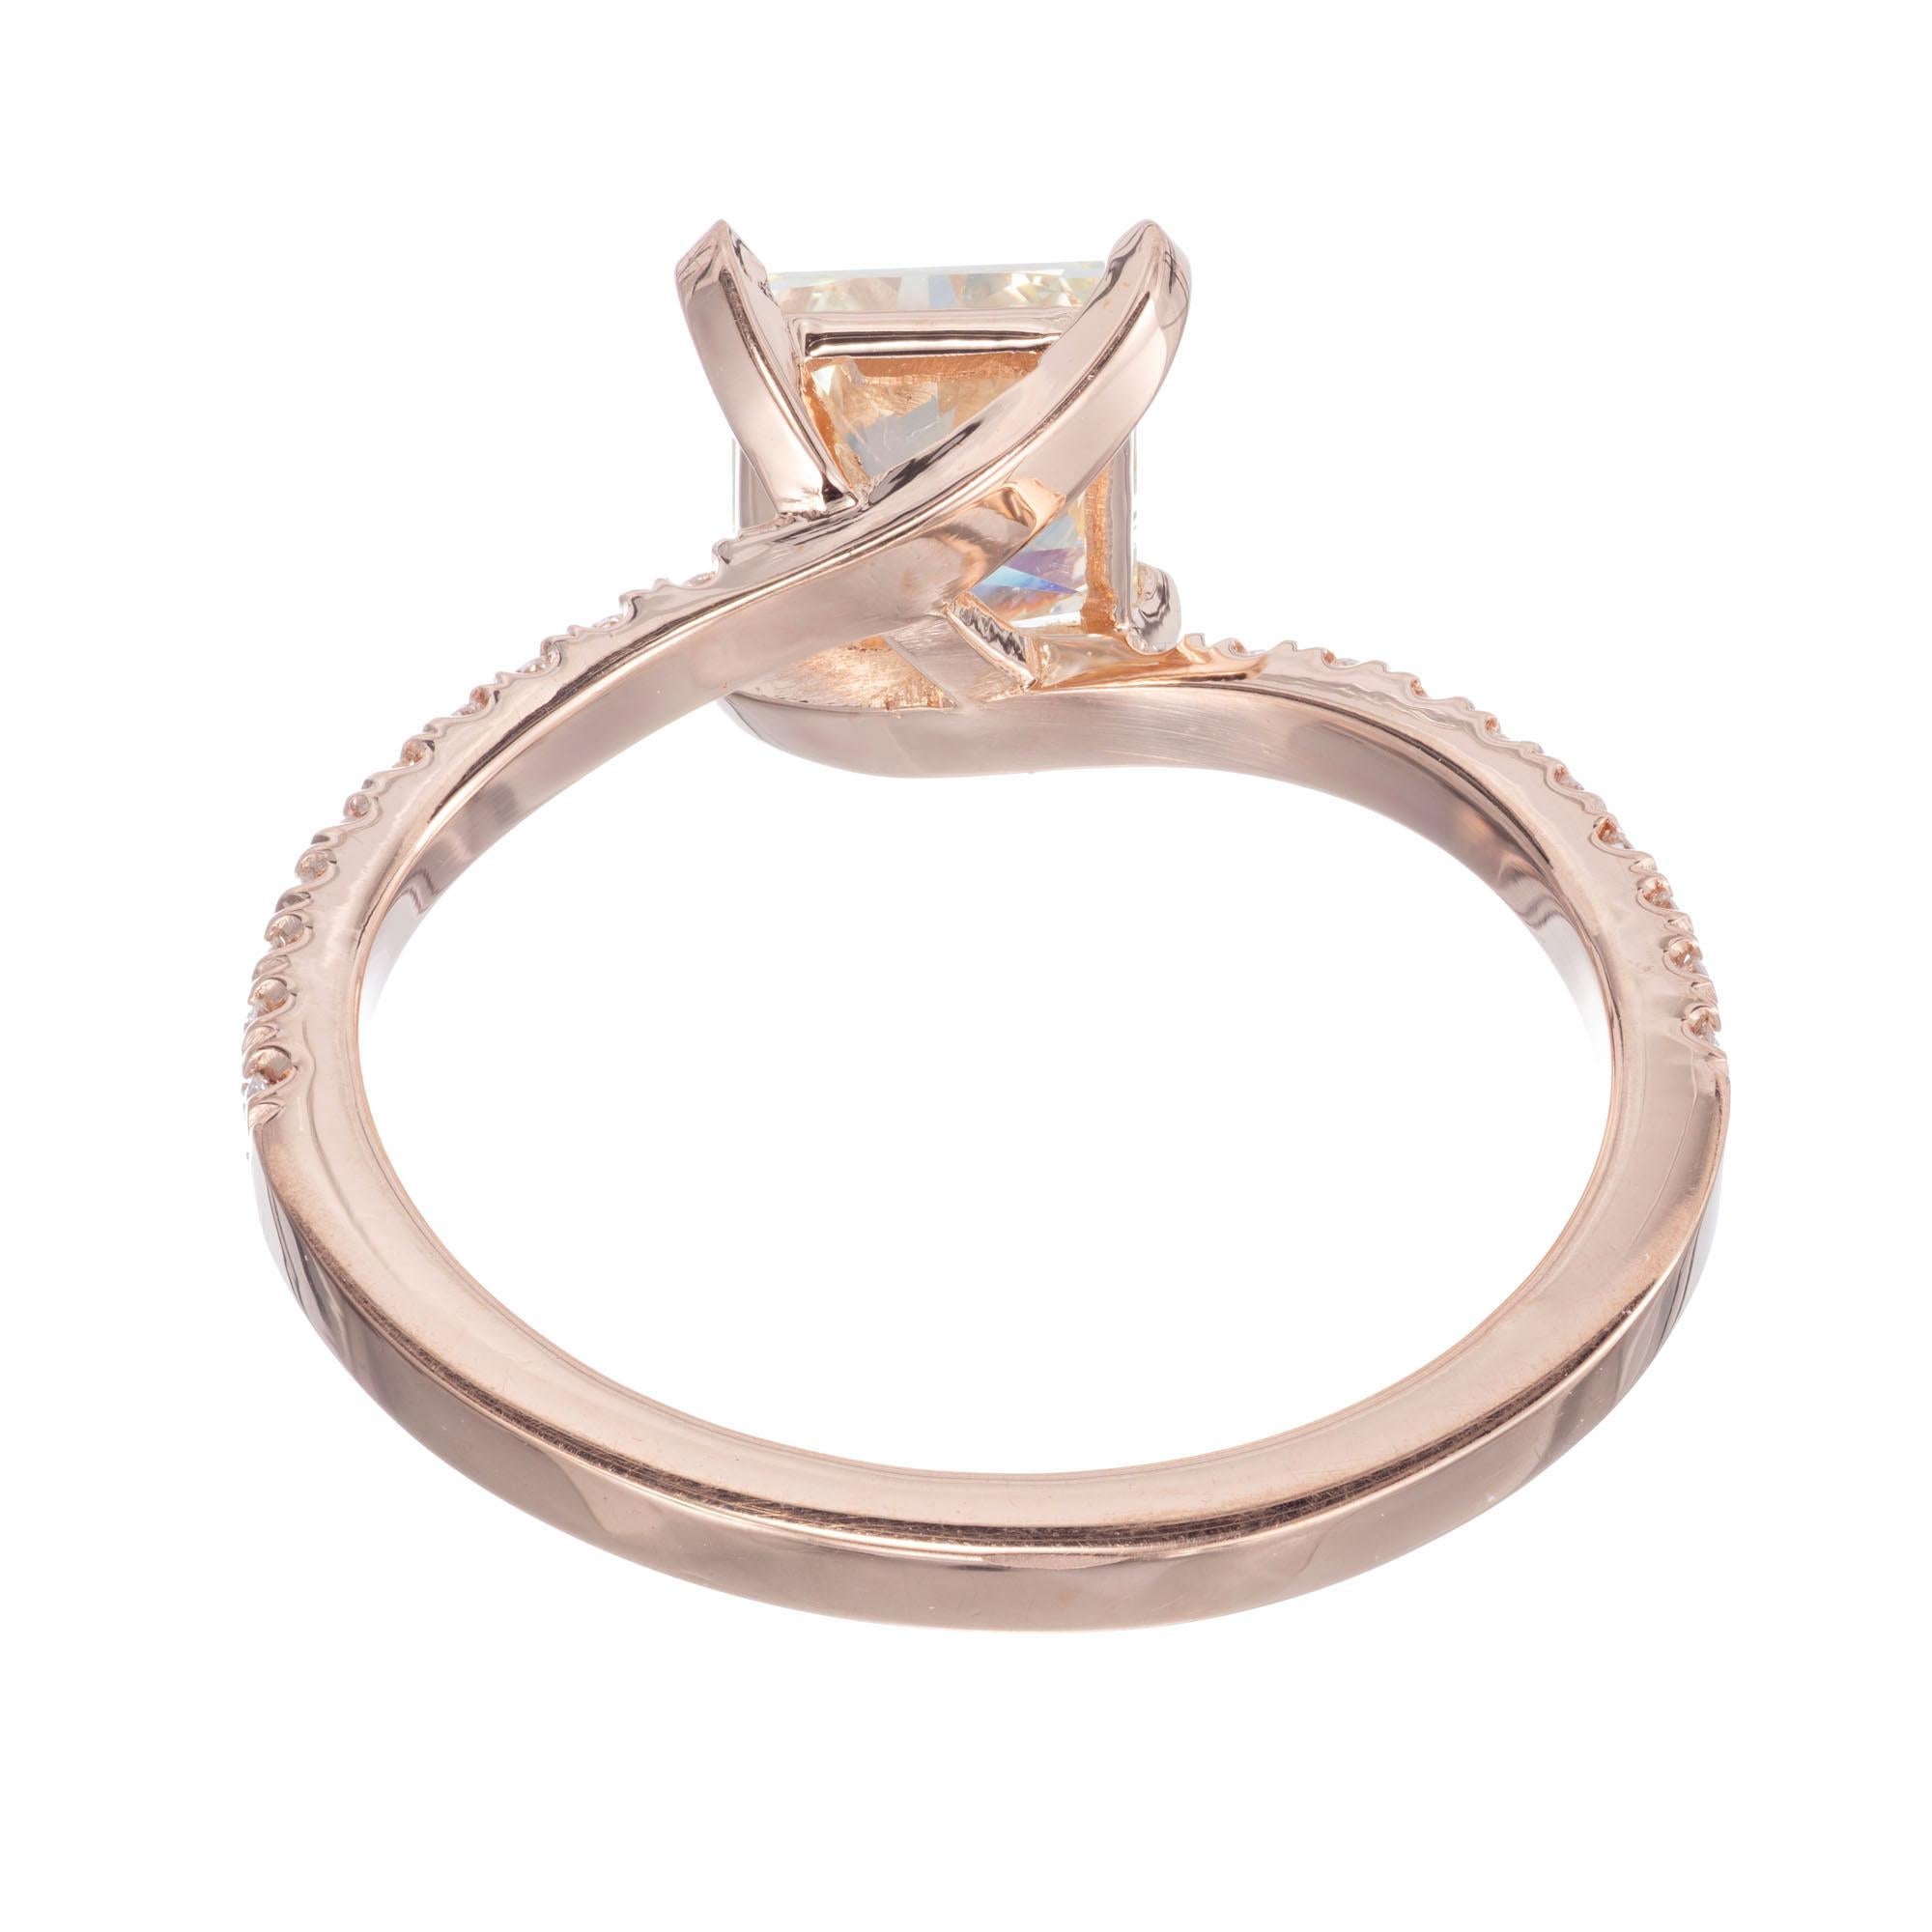 Peter Suchy GIA Certified 1.08 Carat Diamond Rose Gold Engagement Ring In New Condition For Sale In Stamford, CT